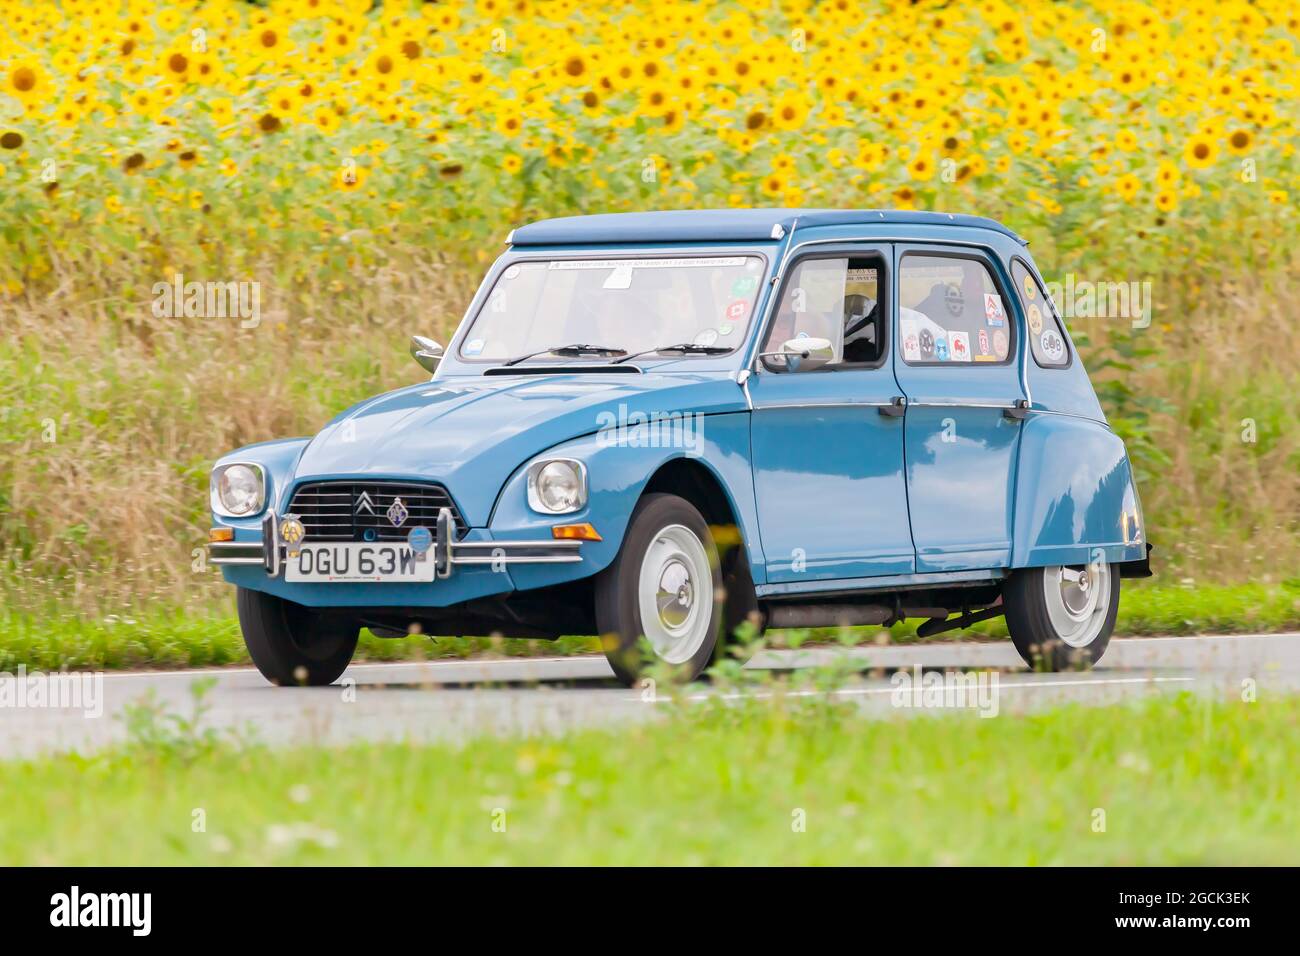 DIEREN, THE NETHERLANDS - AUGUST 12, 2016: Blue vintage Citroen 2CV on a local road in front of a field with blooming sunflowers in Dieren, The Nether Stock Photo